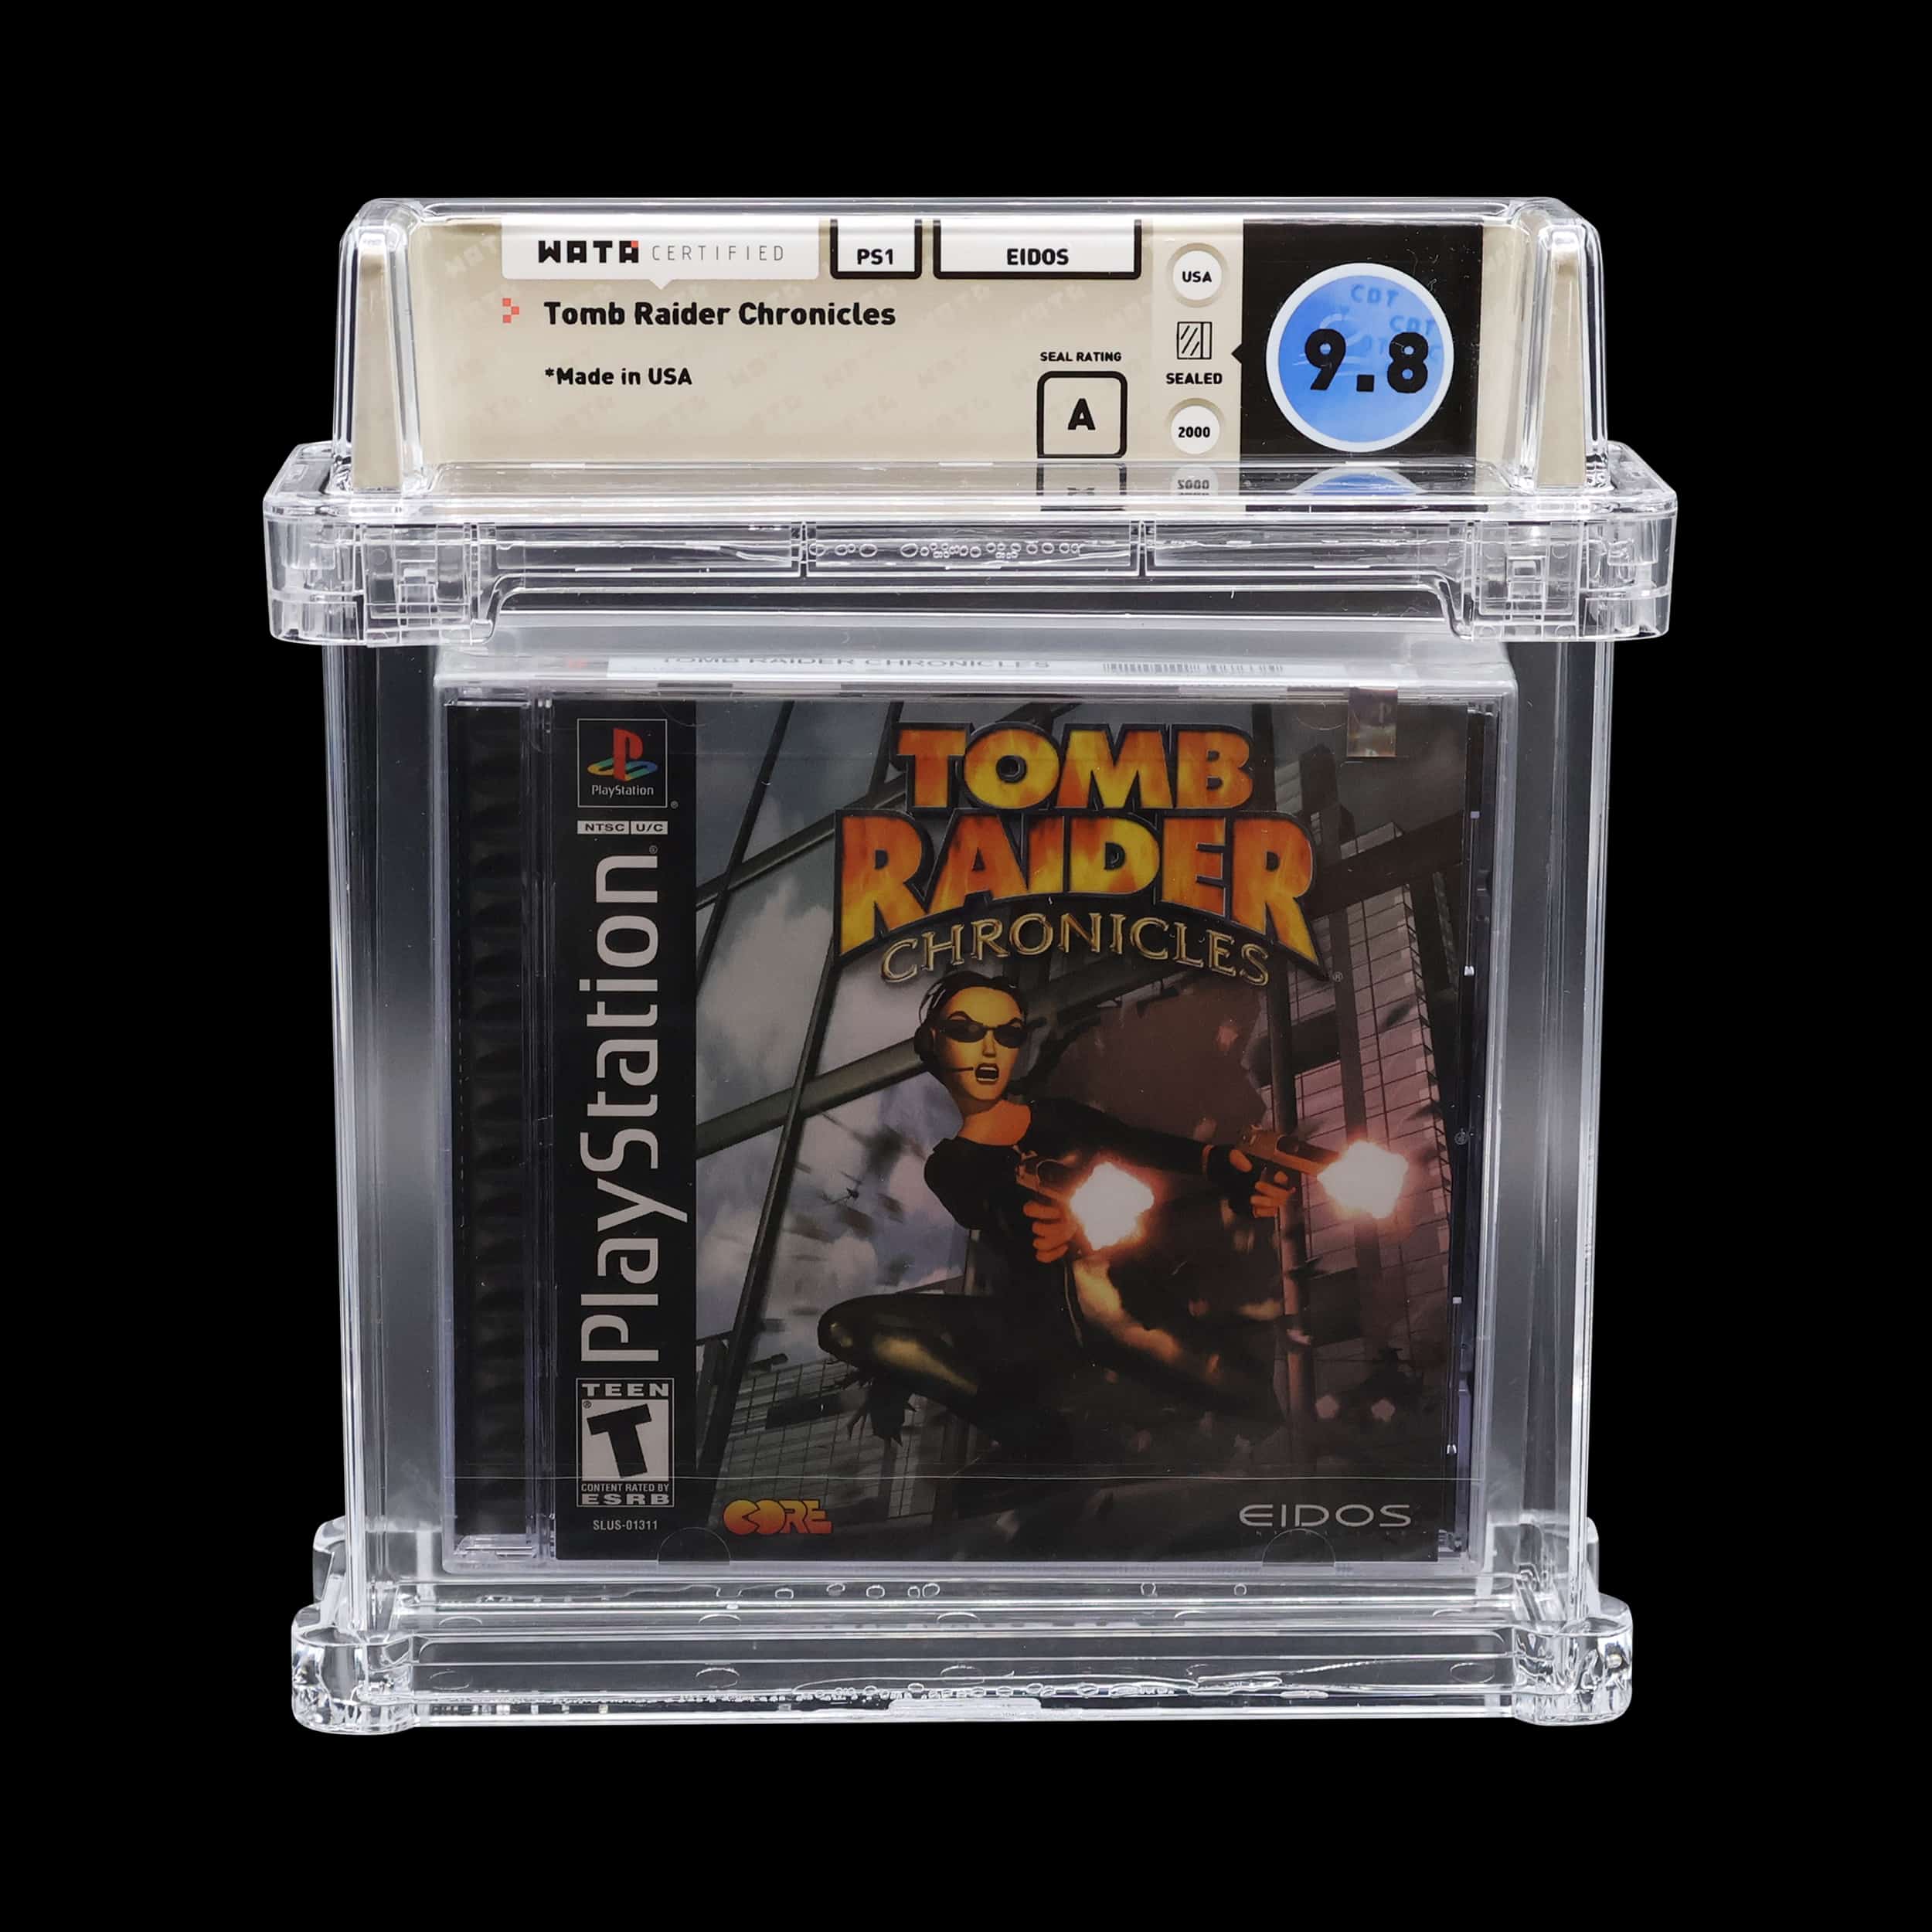 Mint condition Tomb Raider Chronicles for PlayStation 1, graded 9.8 by WATA.